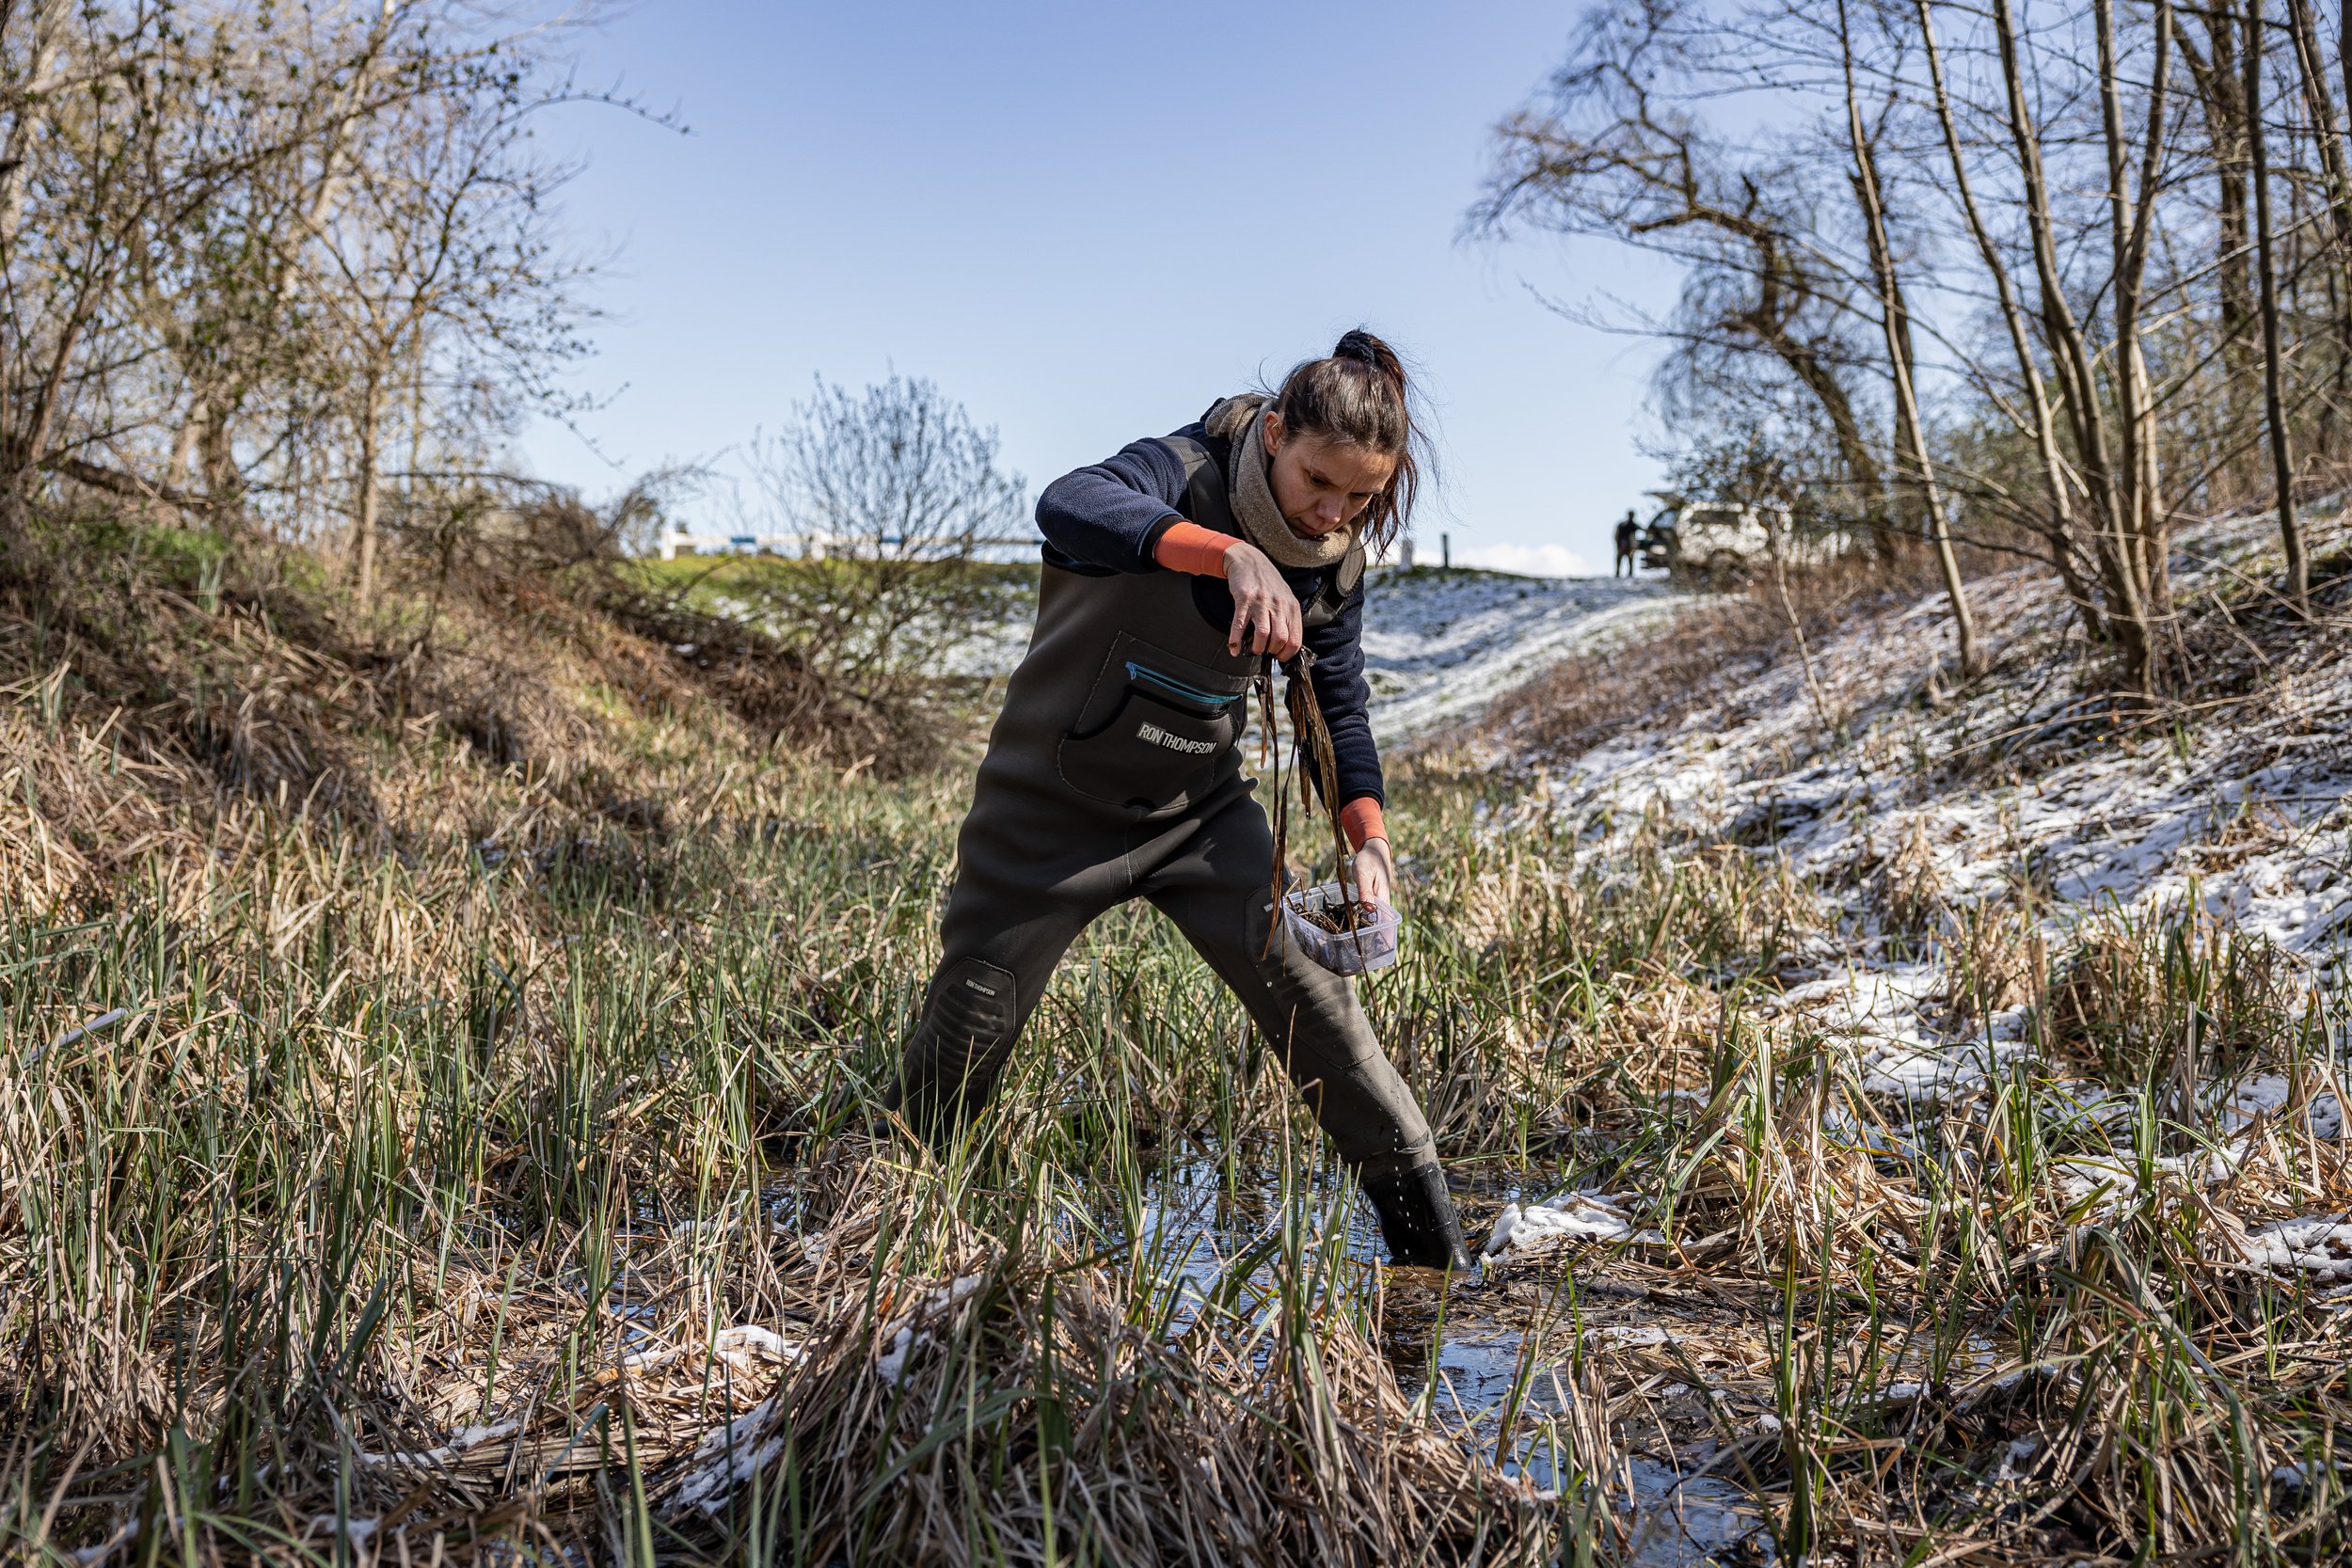  Hungary, Debrecen, Fancsika II Reservoir, 28. 03. 2023.  Béres Viktória biologist at work      Photo: Márton Kállai / NOOR                                       Almost 60% of the streams and rivers worldwide cease to flow at least once a year. Inter